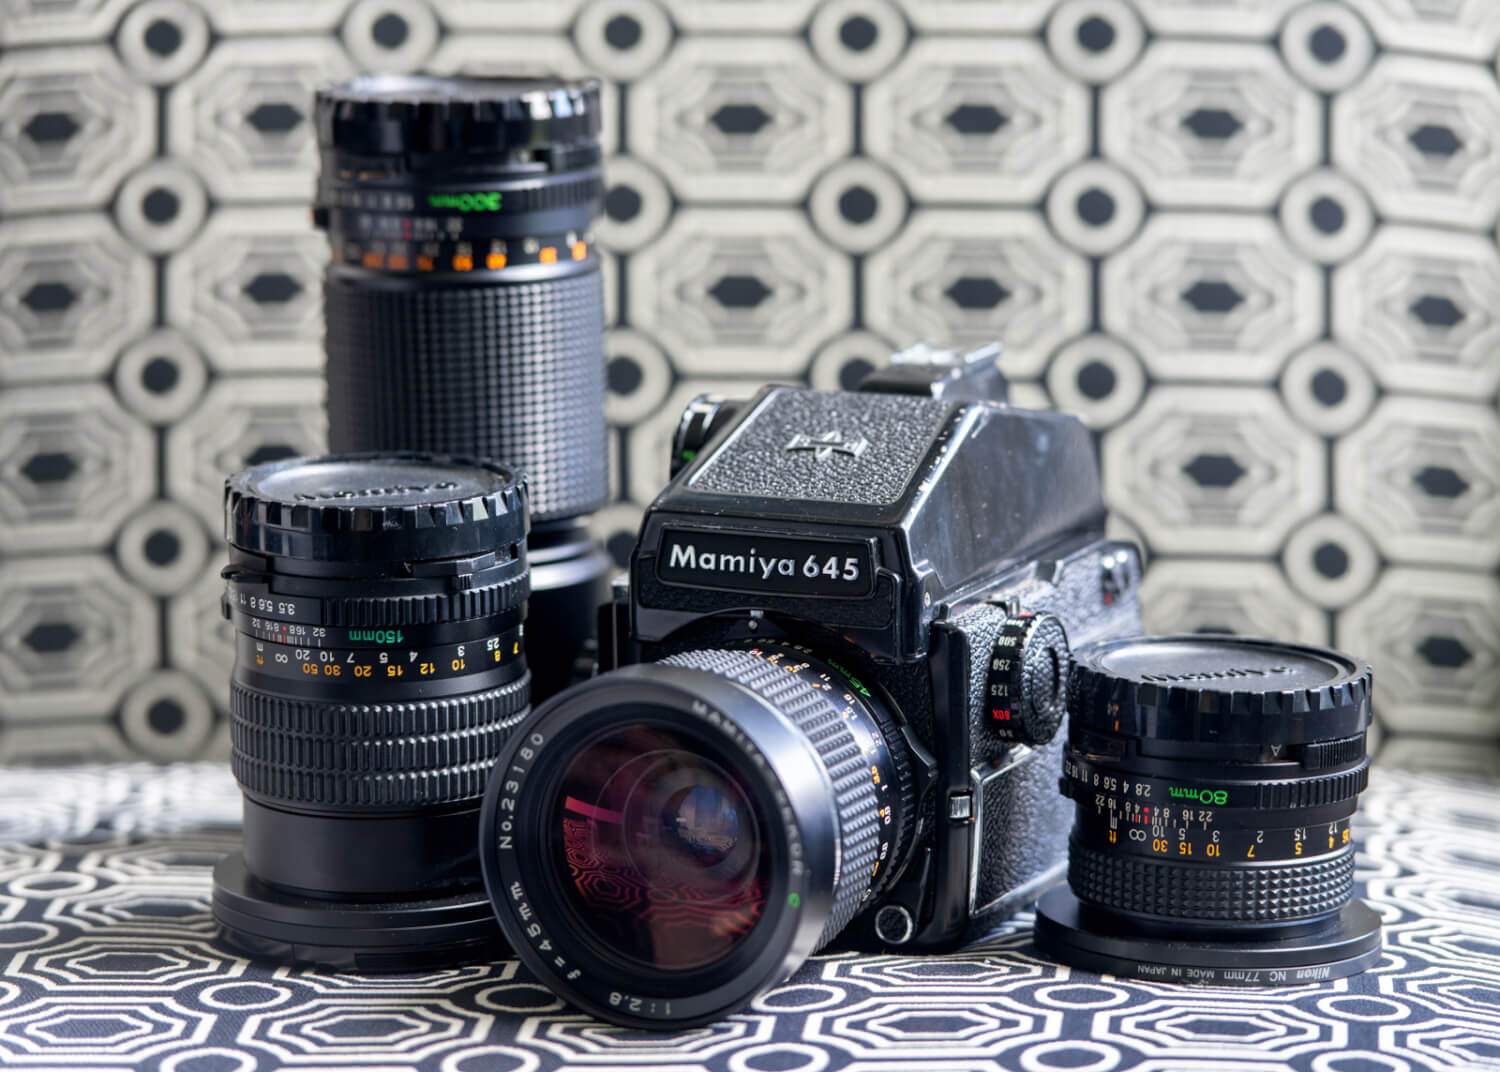 Mamiya 645 1000s with manual focus Secor-C prime lens selection